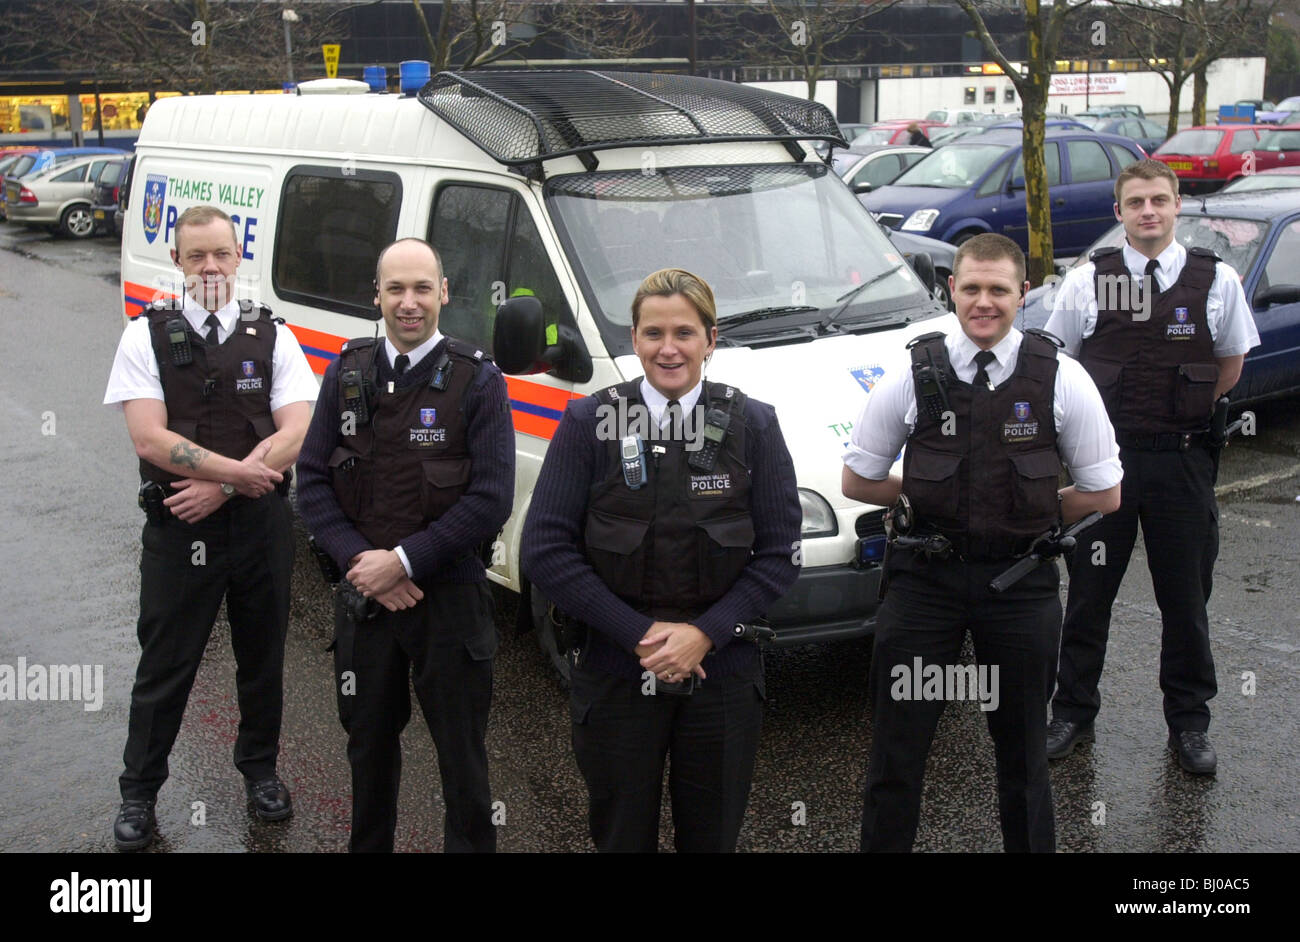 http://c8.alamy.com/comp/BJ0AC5/five-thames-valley-police-officers-in-front-of-a-police-van-uk-BJ0AC5.jpg